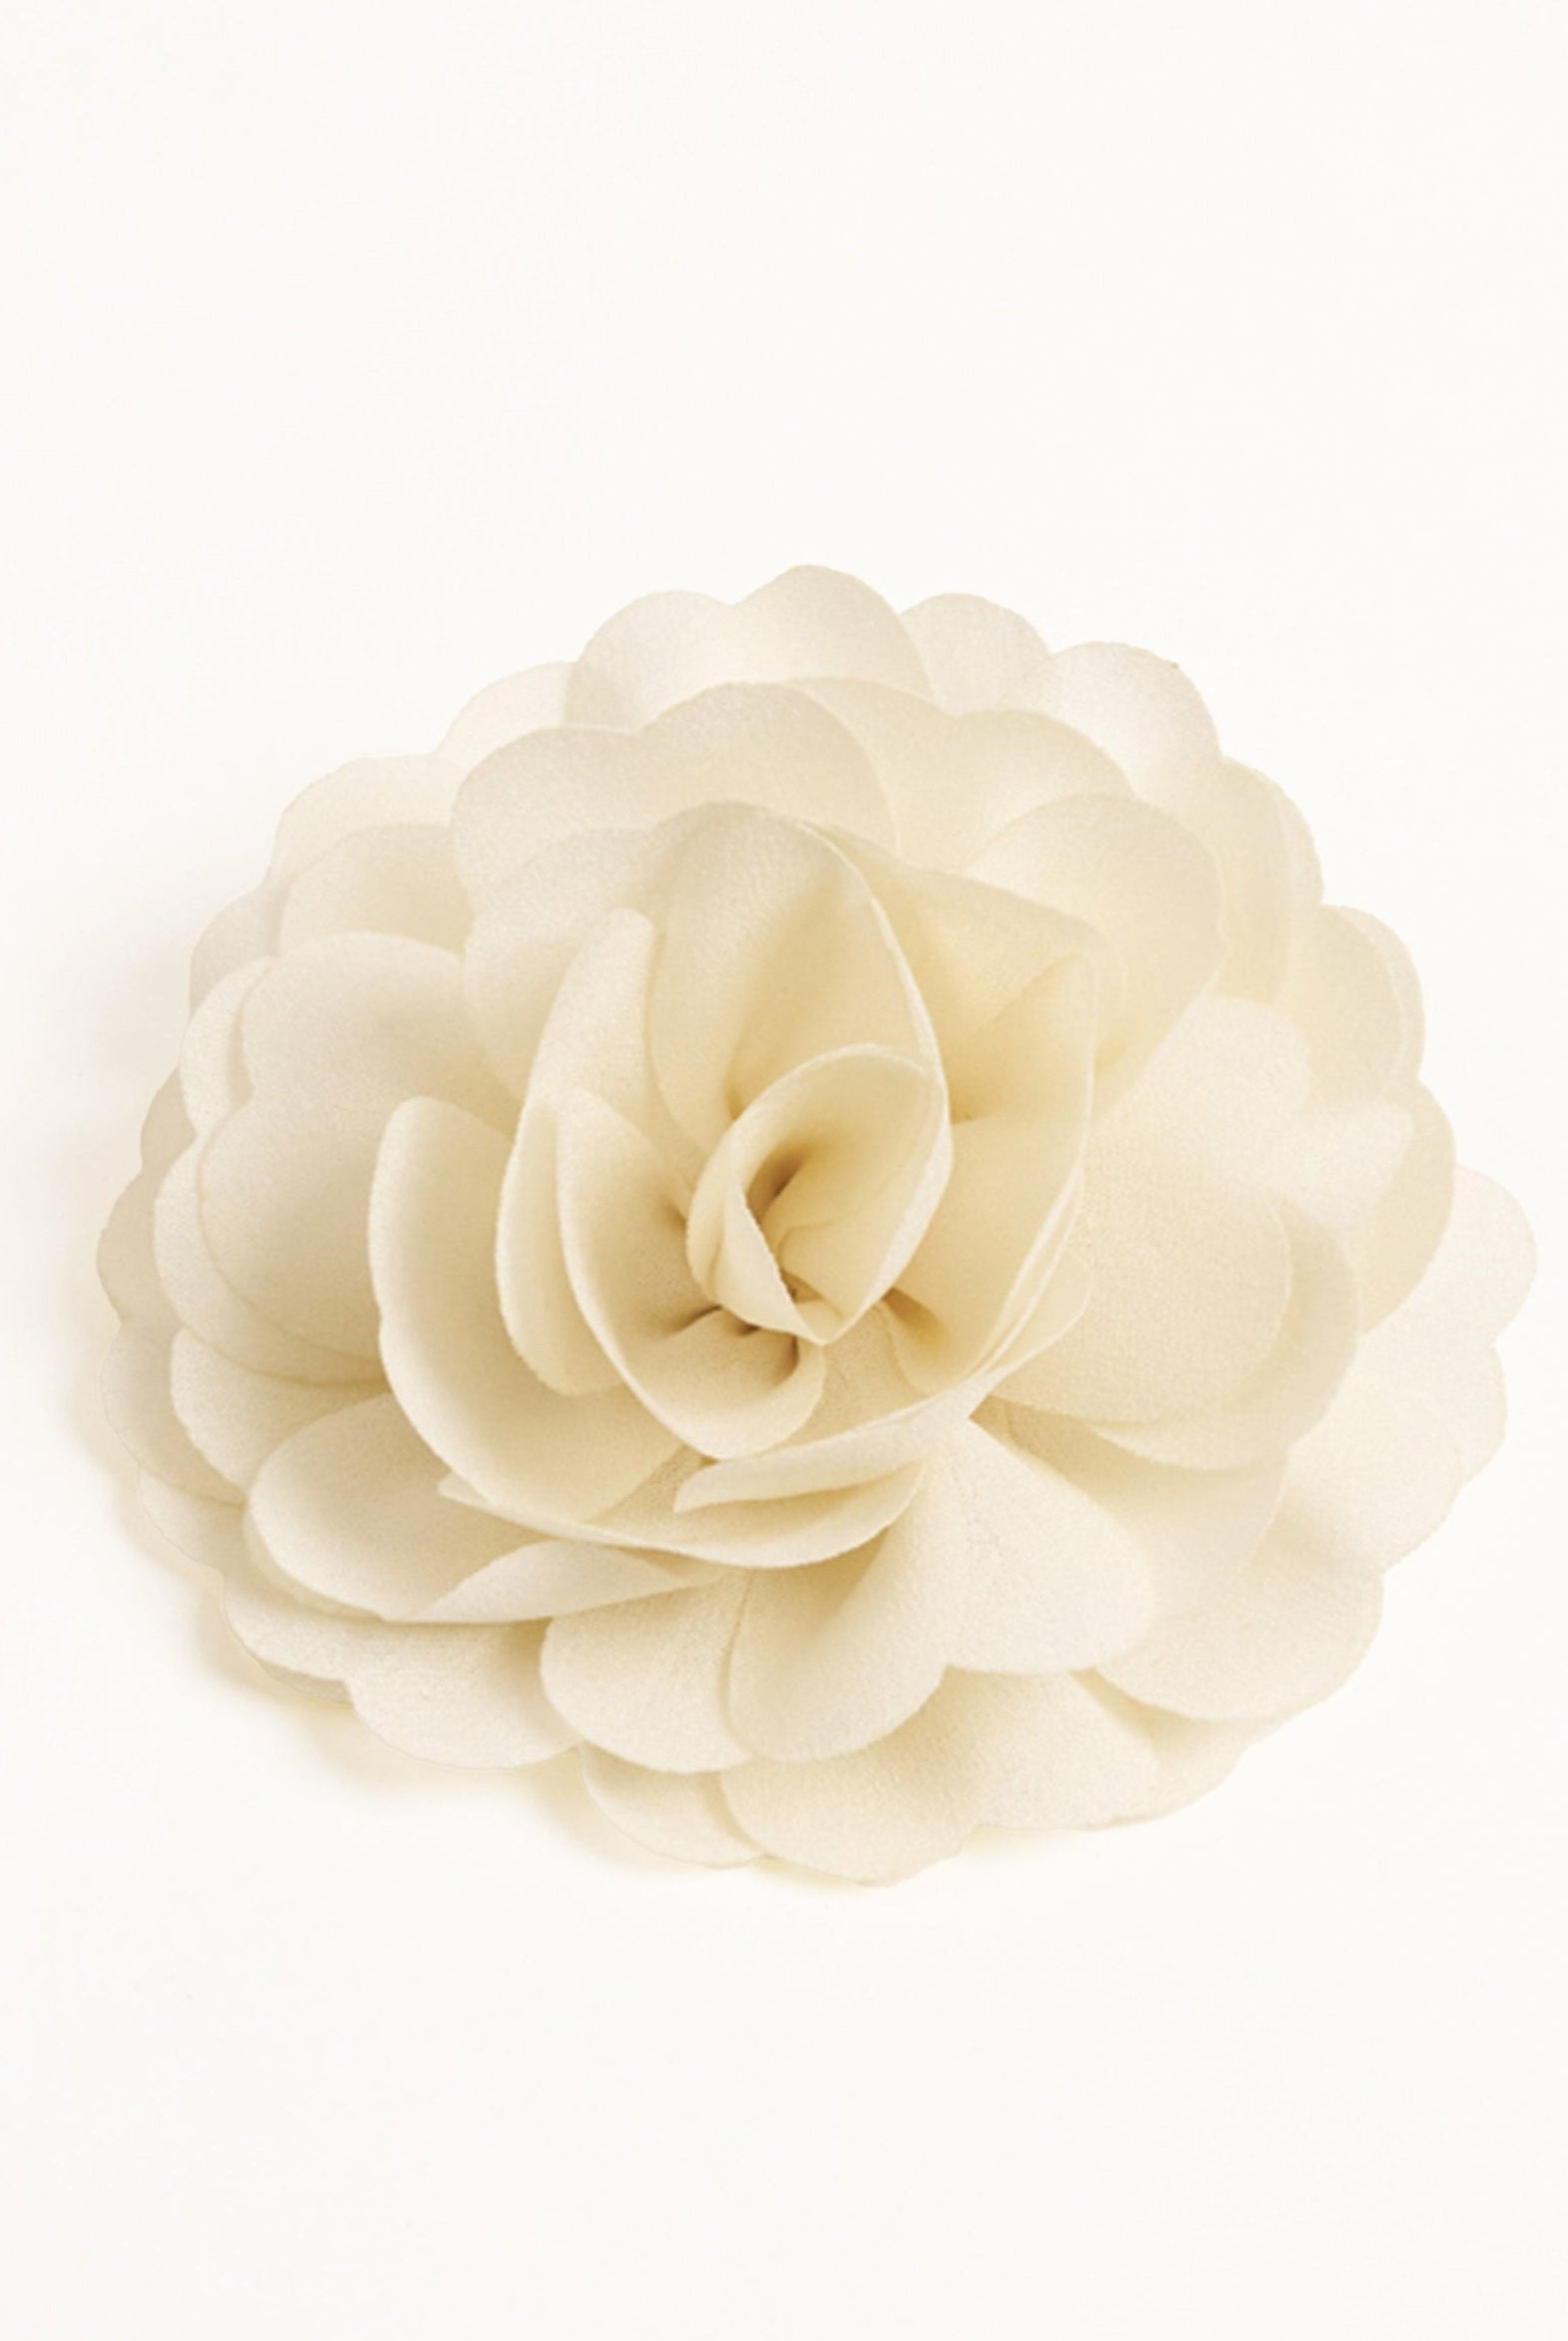 Chiffon Flower Hair Clip in Cream | Preppy | Old money | Halloween | Costume | Holiday | Retro | Y2k | Corsage | Glam | Going Out Accessories | hair accessories | Accessories | Flower Clip | Flower | Women | party | Occasion | New Years | Christmas | Wedding | Wedding Guest | Races |